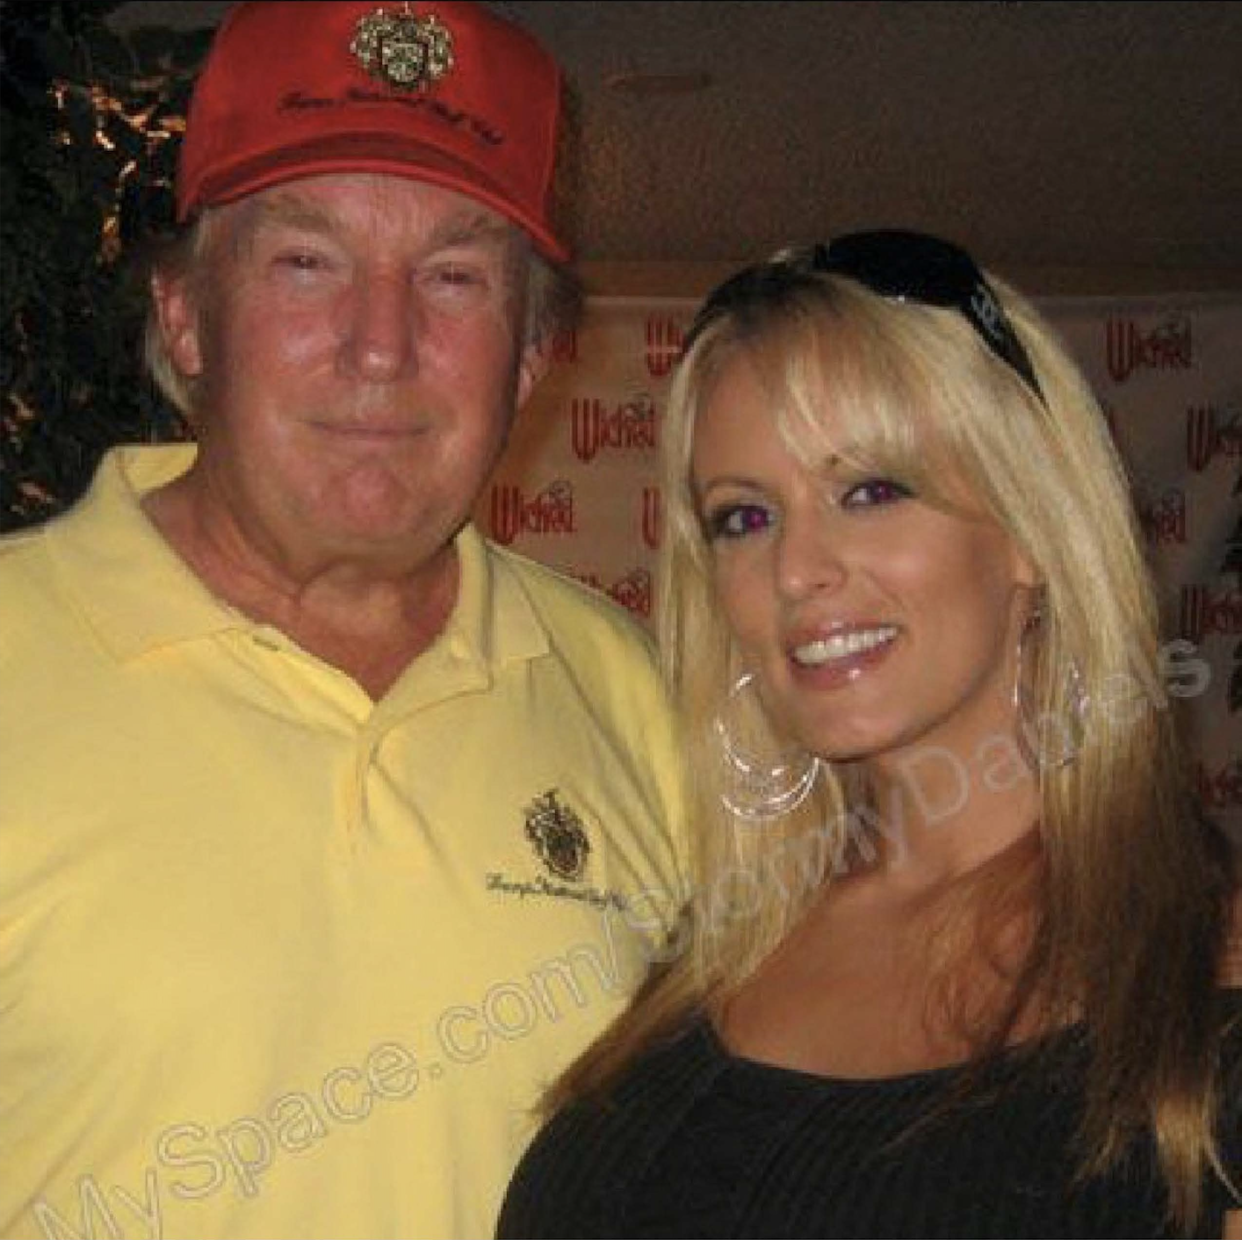 A 2006 photo of Donald Trump with Stormy Daniels uploaded to her Myspace.com account was submitted into evidence at Trump's criminal hush money trial on May 7.